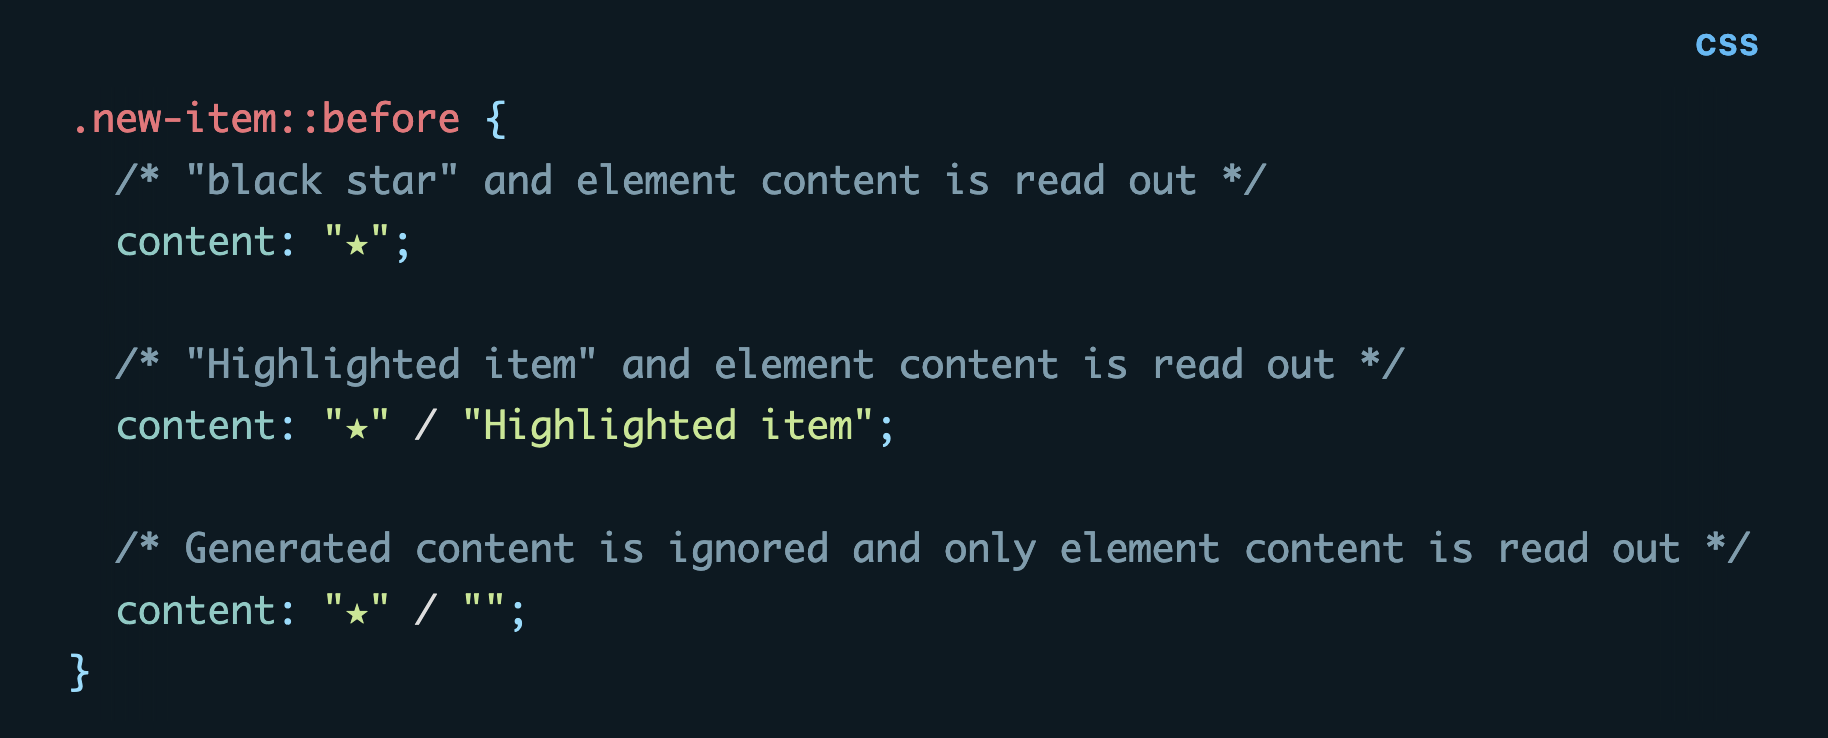 CSS code: .new-item::before {   /* "black star" and element content is read out */   content: "★";      /* "Highlighted item" and element content is read out */   content: "★" / "Highlighted item";      /* Generated content is ignored and only element content is read out */   content: "★" / ""; }